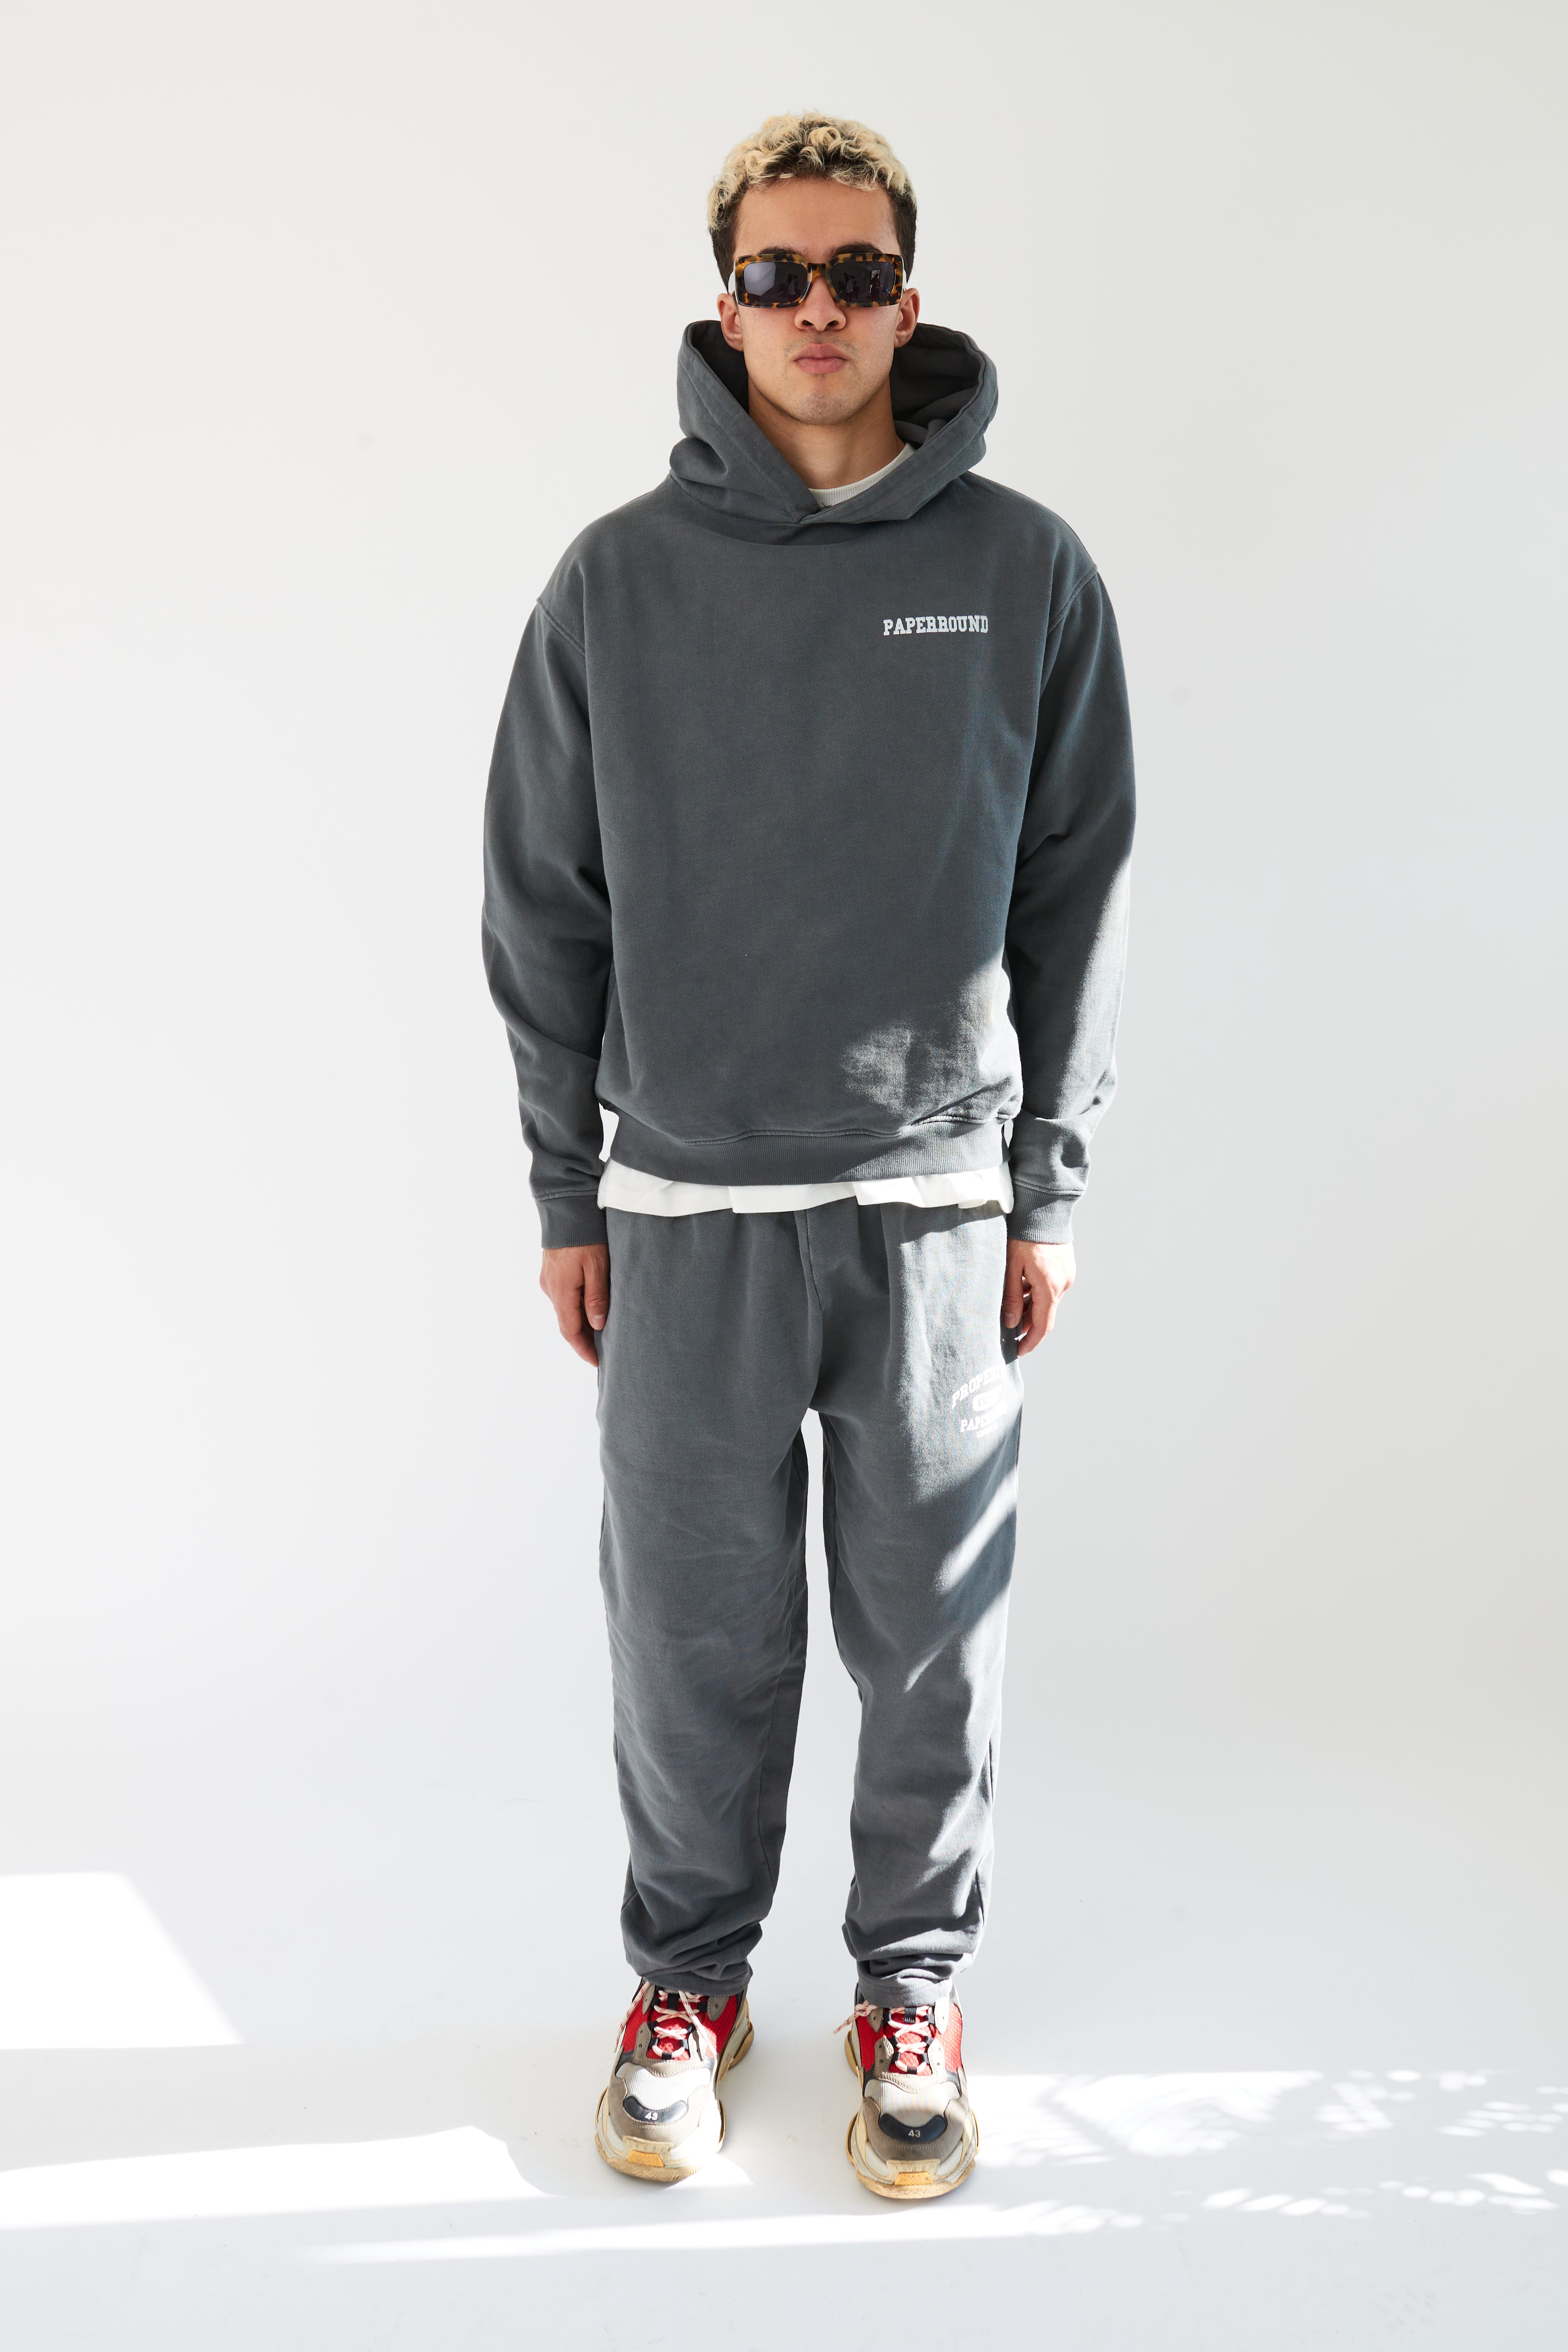 PAPER ROUND JOGGERS  - VINTAGE GREY PROPERTY OF PAPERROUND (TAPERED)